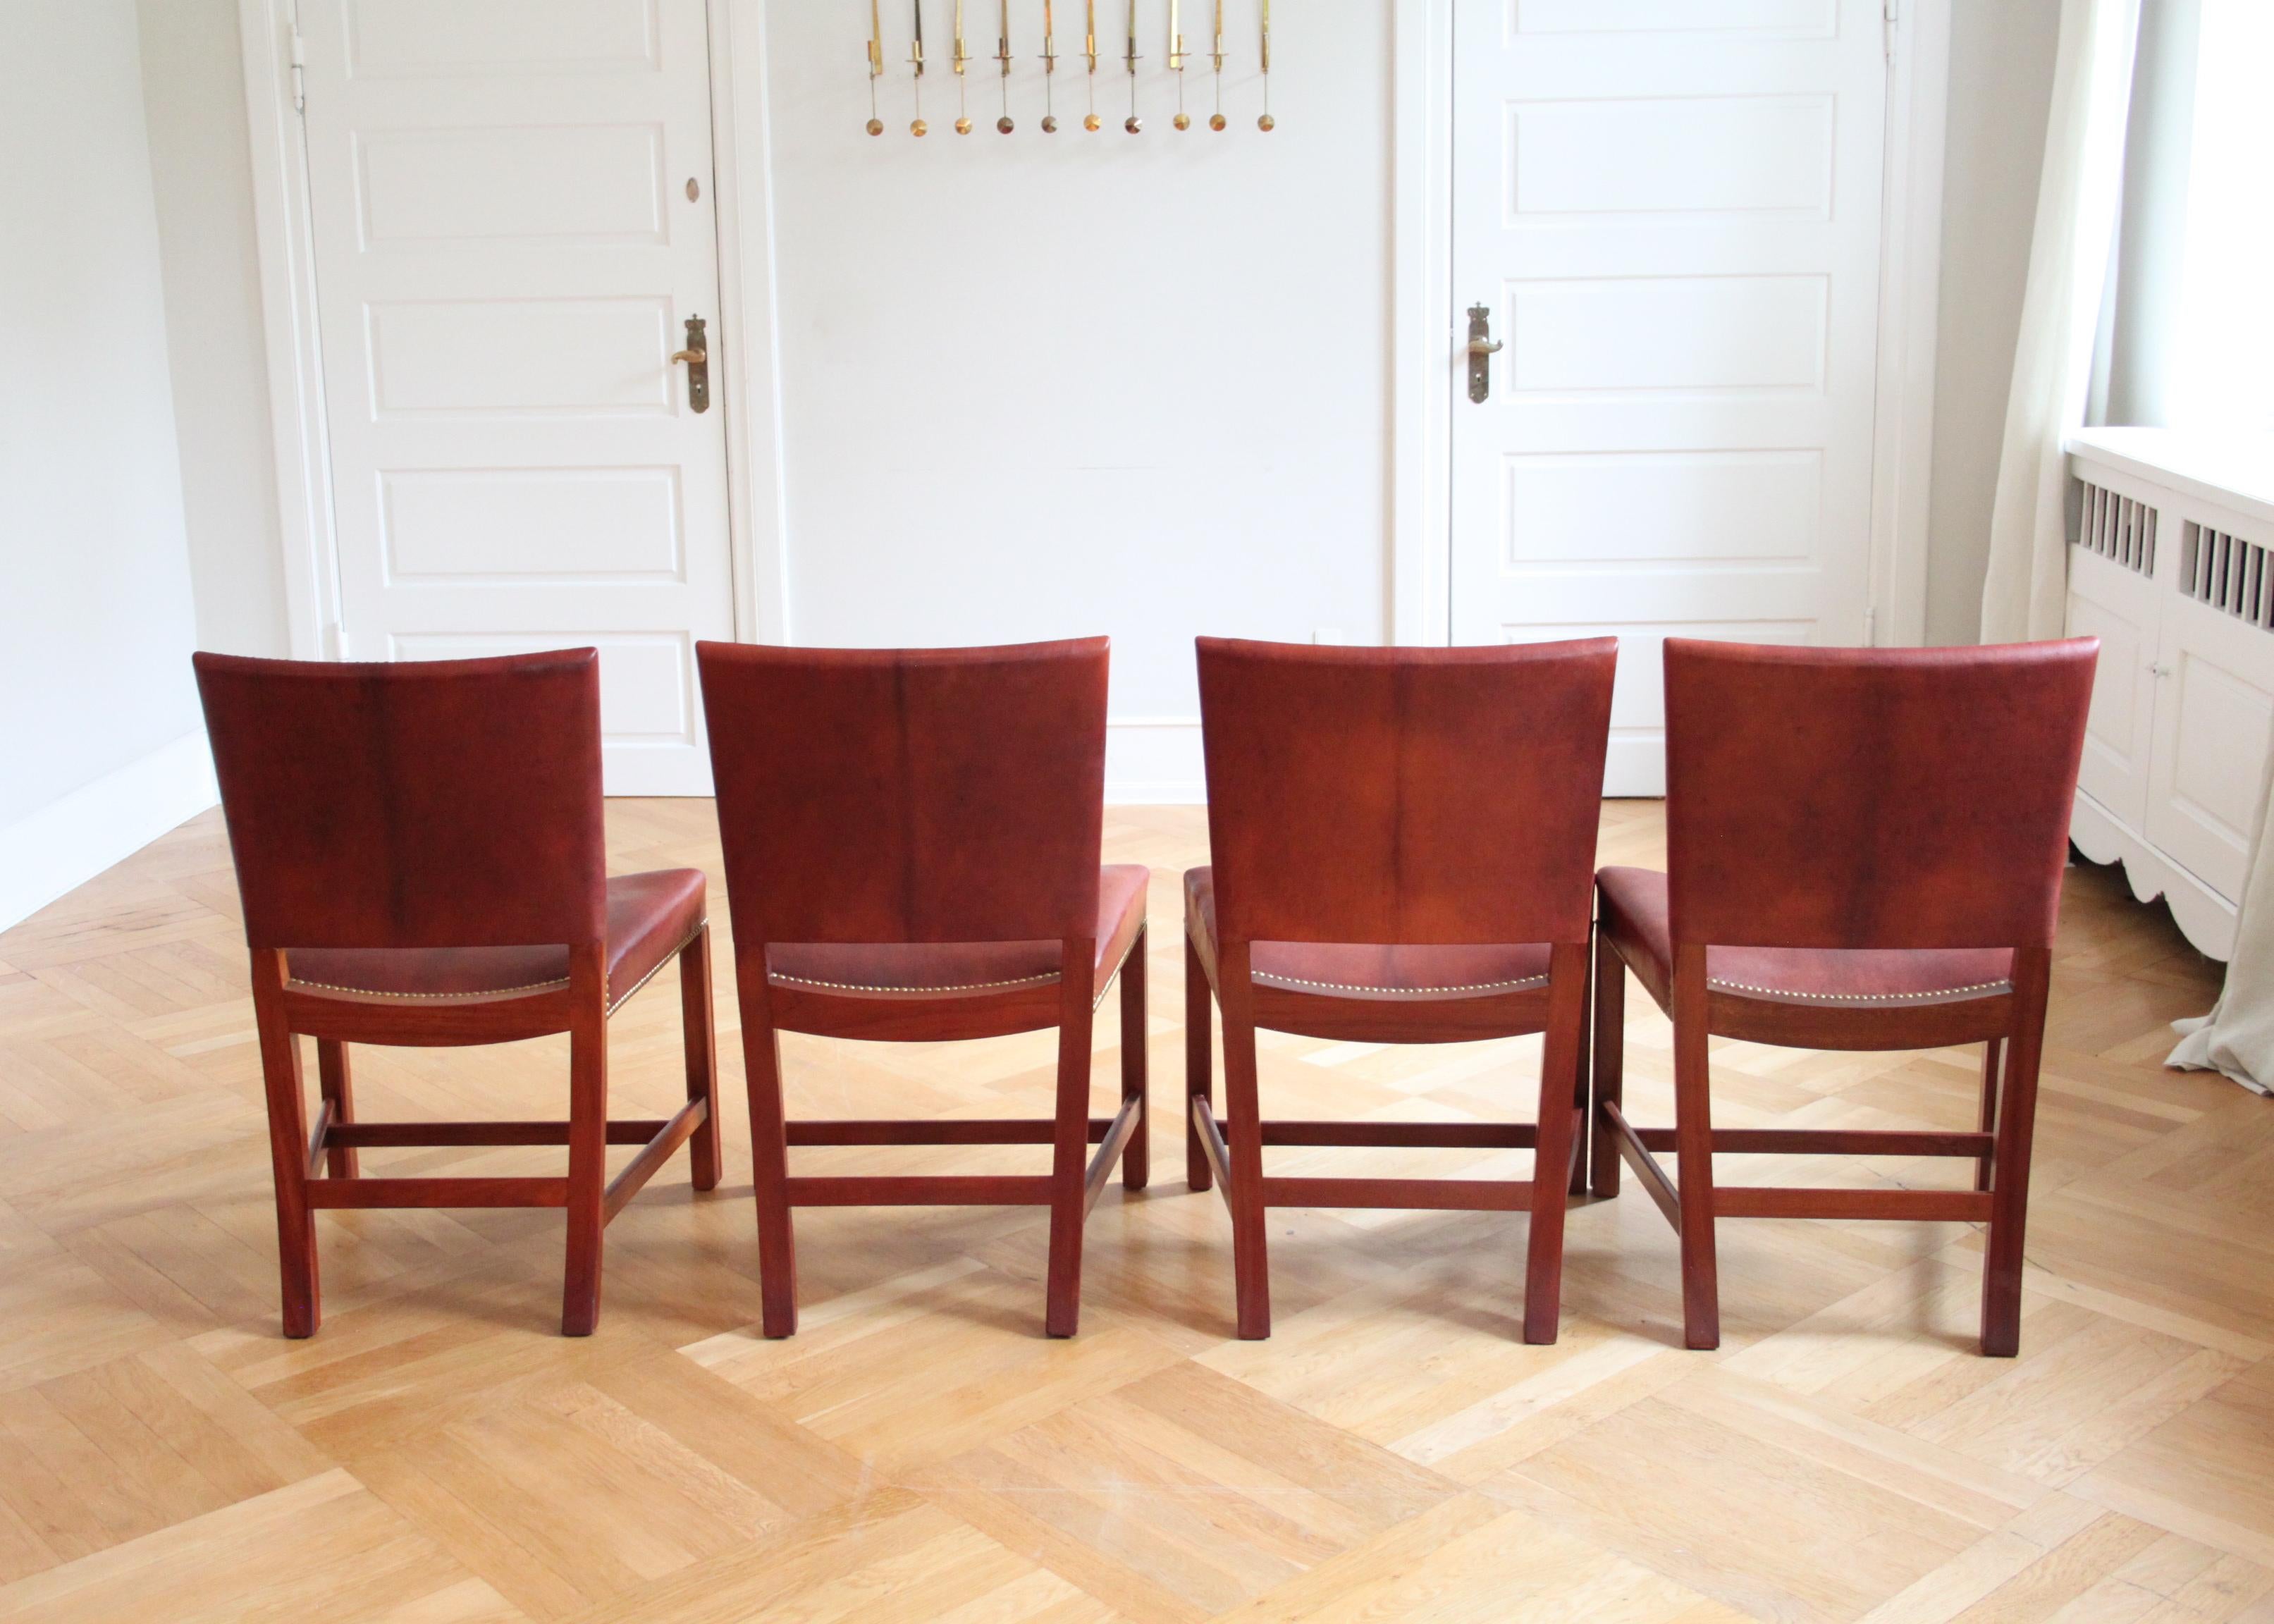 Set of Twelve Kaare Klint Red Chairs, Rud Rasmussen, Niger Leather and Mahogany For Sale 4